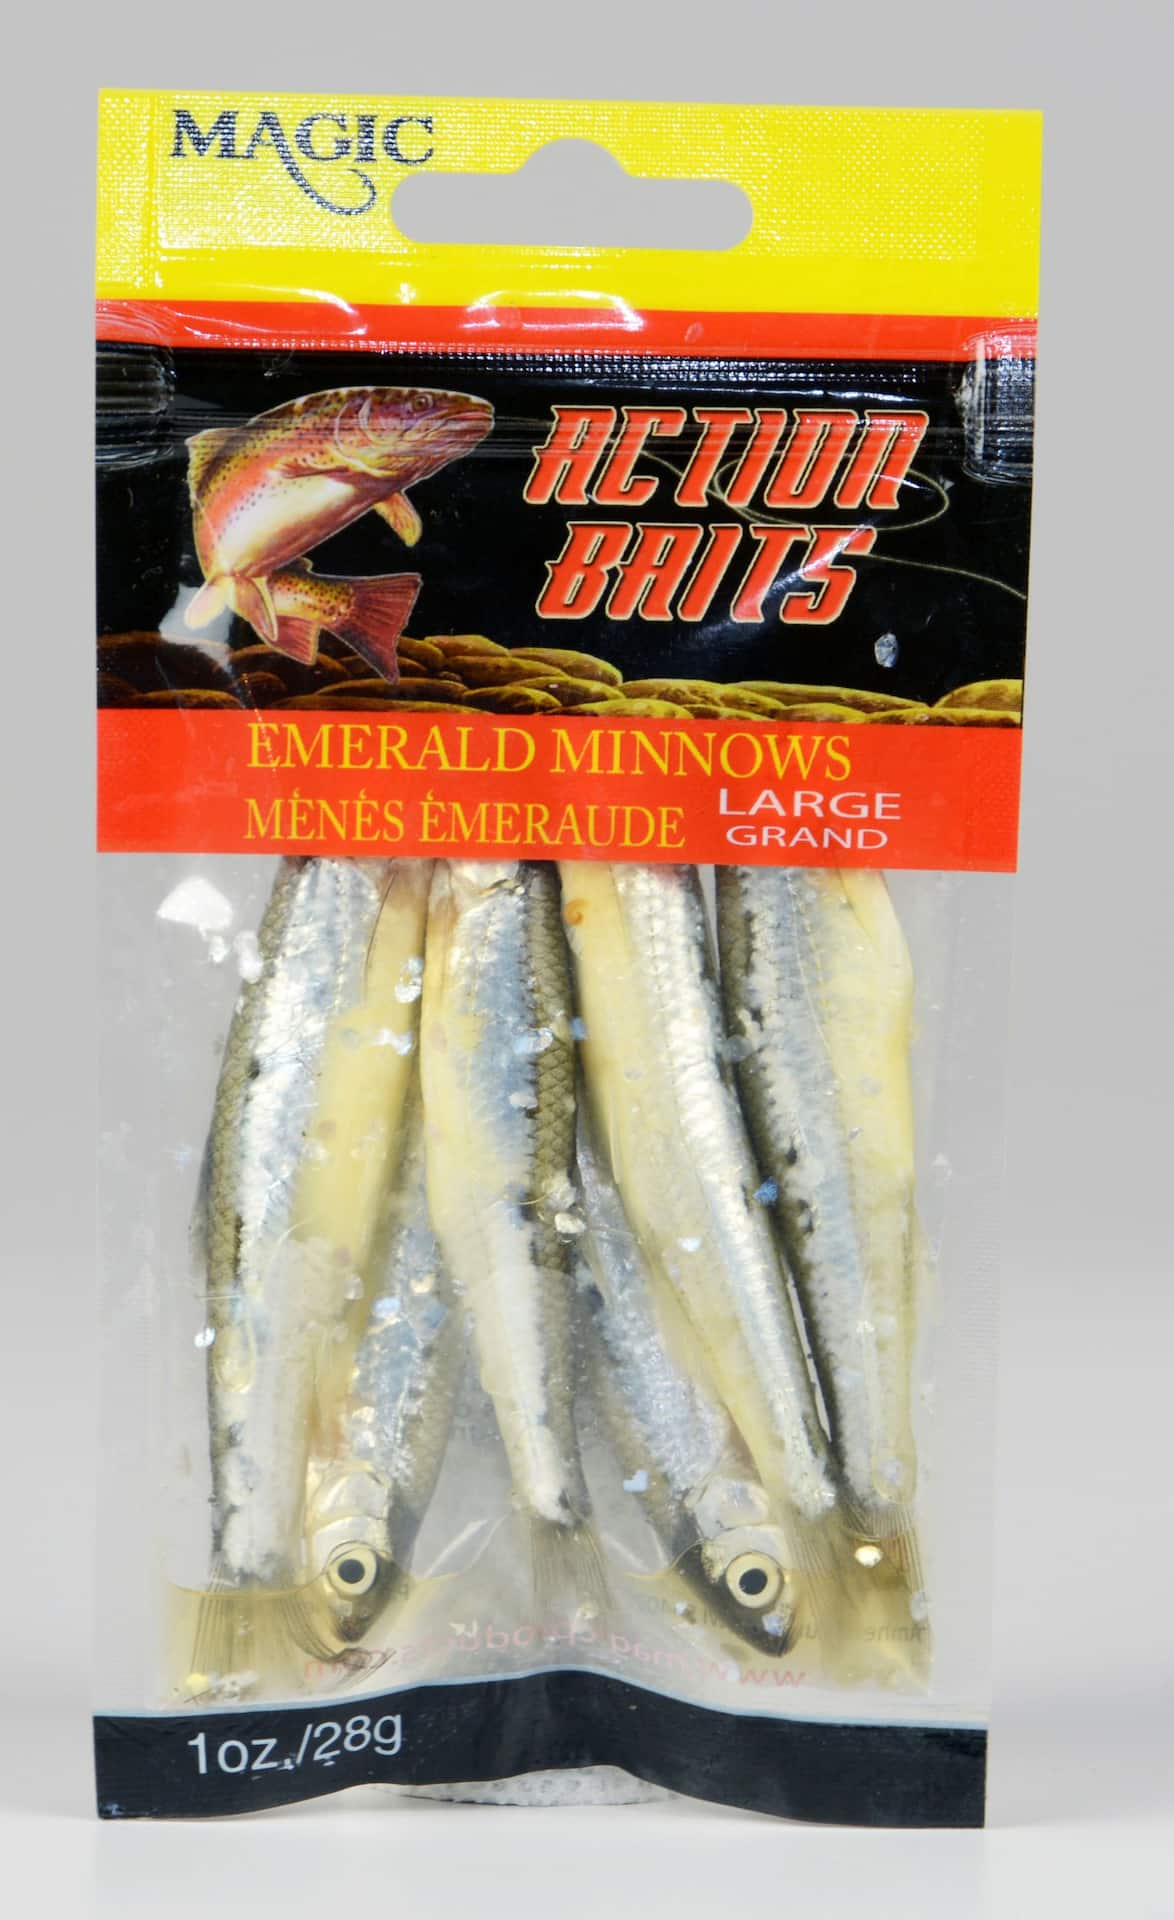 https://media-www.canadiantire.ca/product/playing/fishing/fishing-lures/0770787/magic-preserved-emerald-minnow-large-d5893a27-5283-4222-a0c3-11204cfc7b5f-jpgrendition.jpg